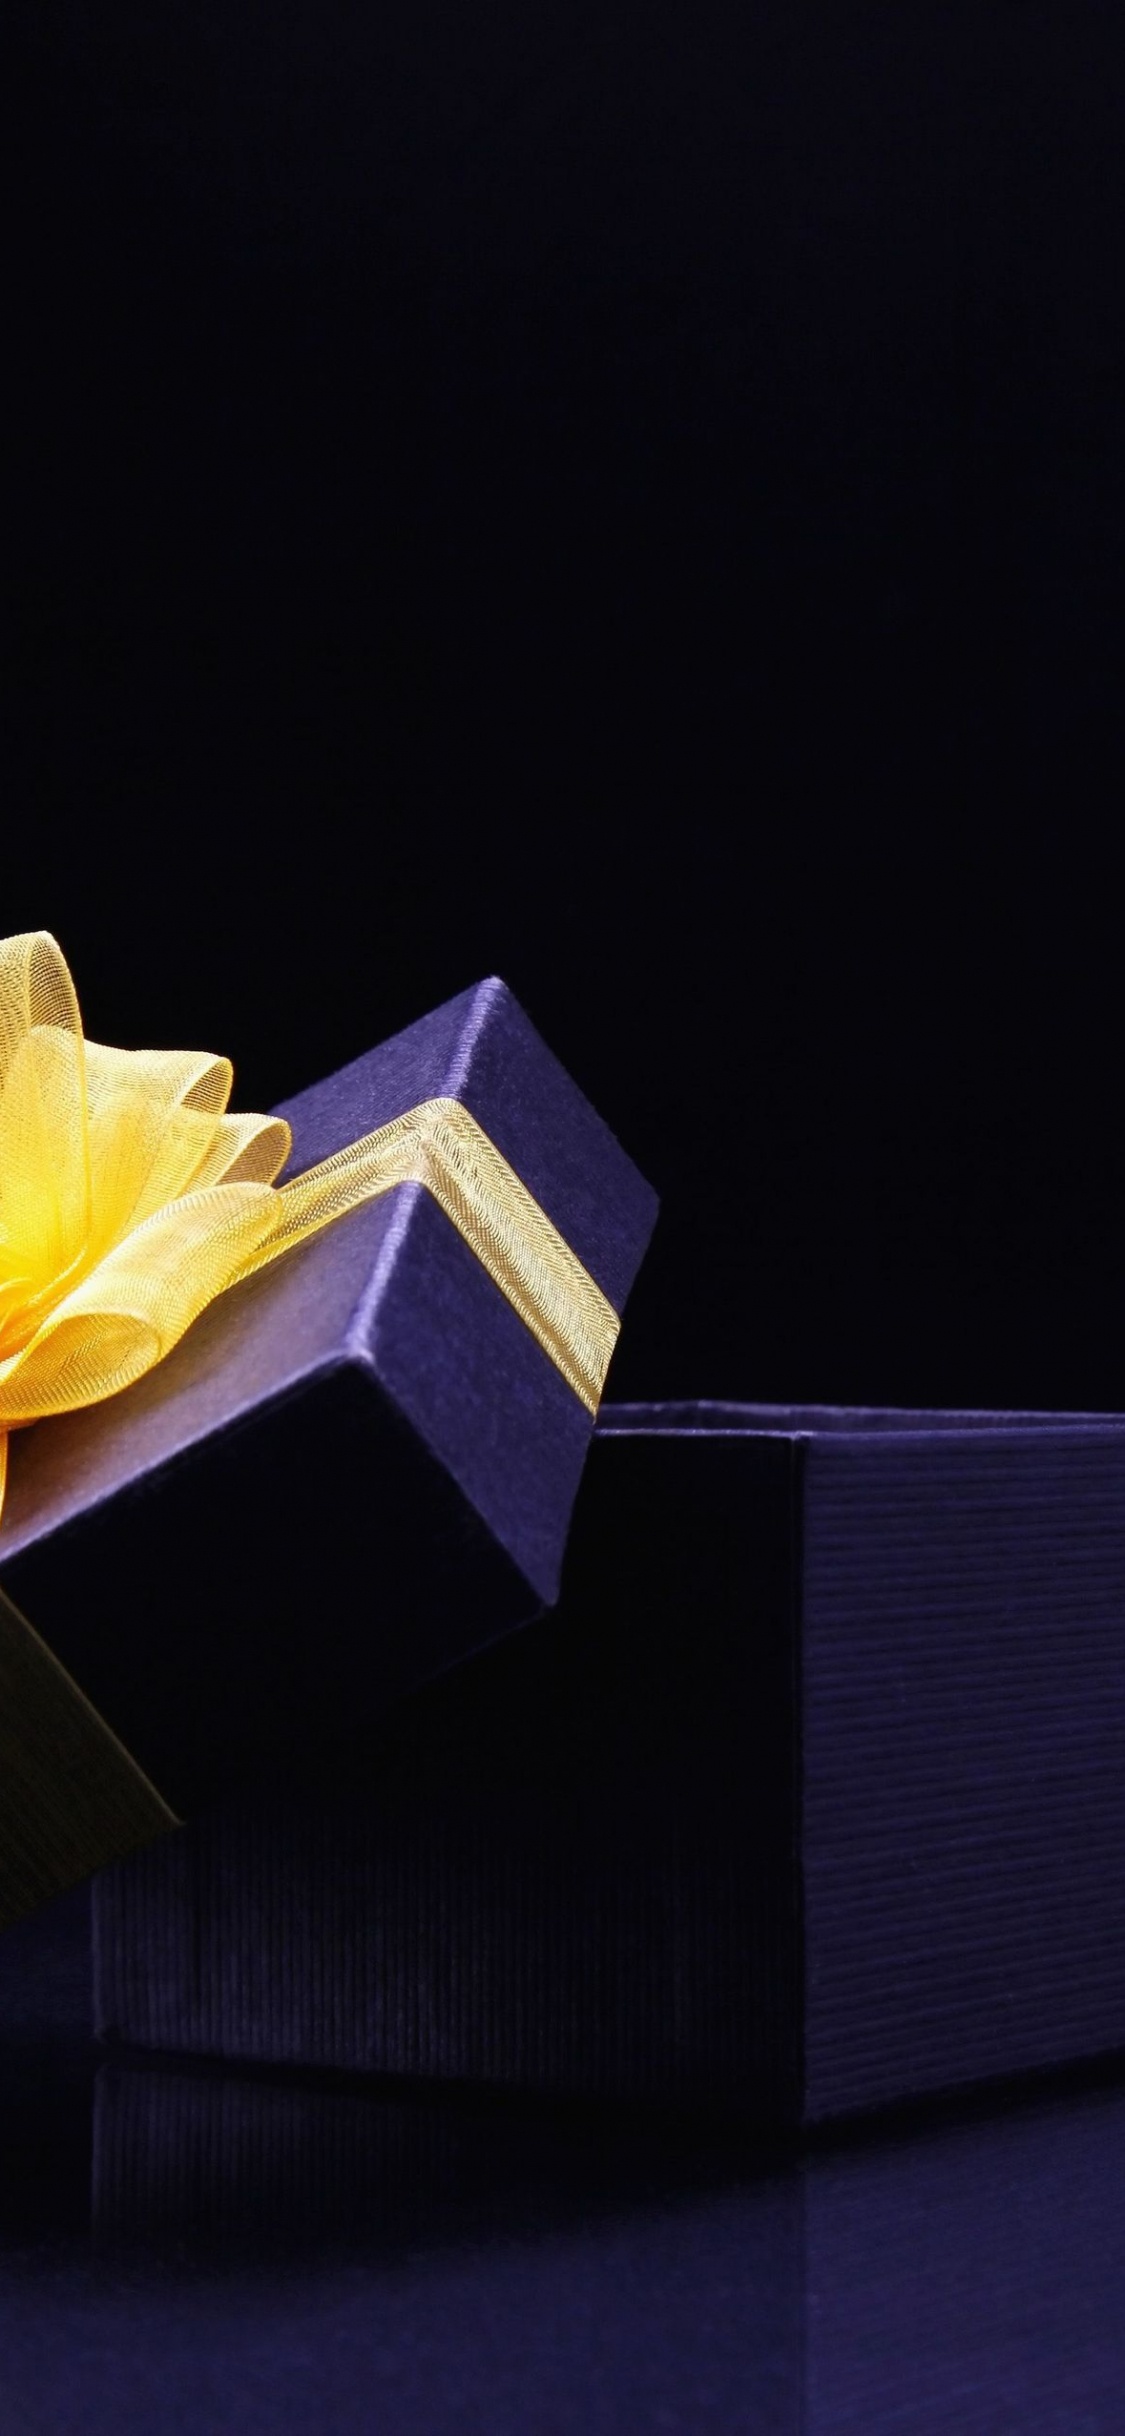 Gift, Christmas Gift, Origami, Light, Yellow. Wallpaper in 1125x2436 Resolution